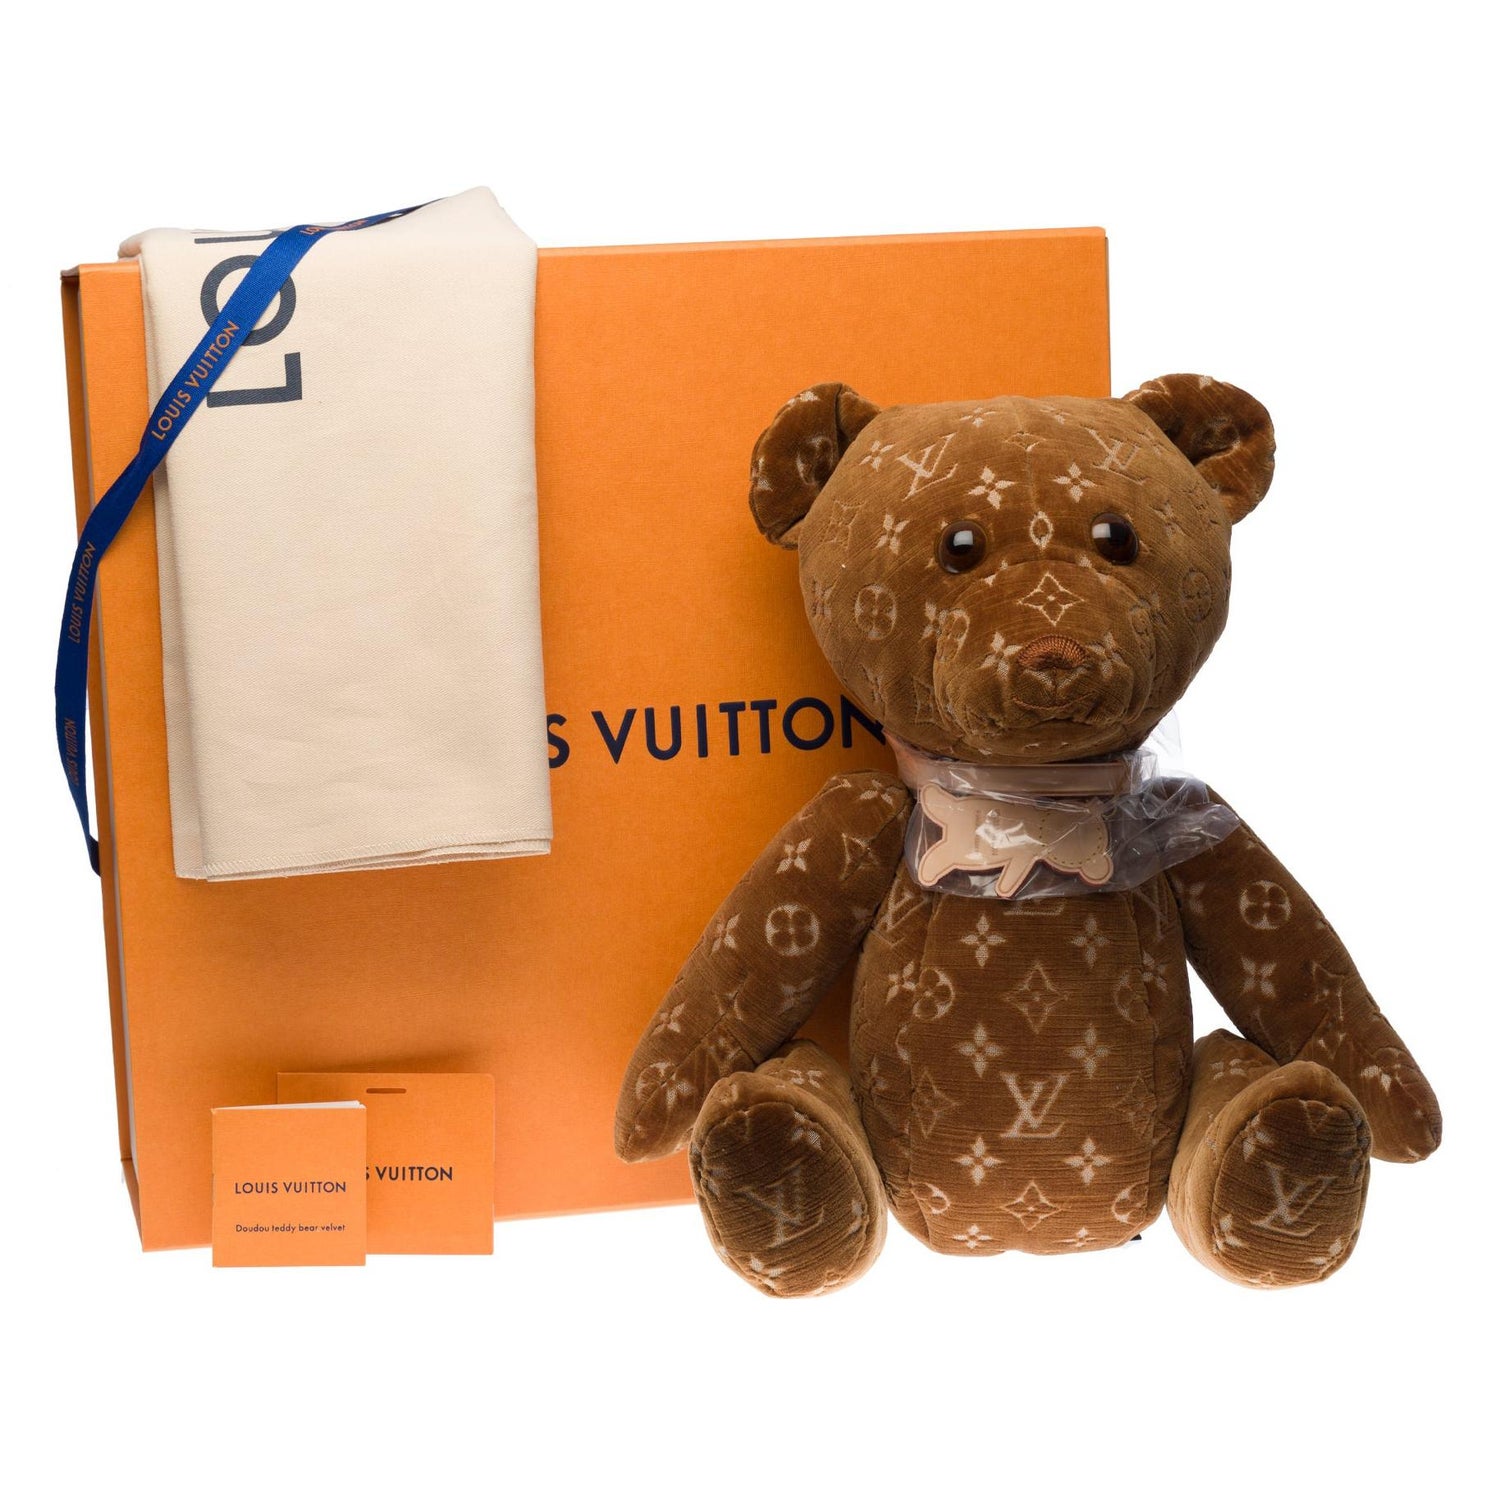 Lv Teddy Bear - For Sale on 1stDibs  louis vuitton teddy bear, louis  vuitton steiff bear, louis vuitton toy